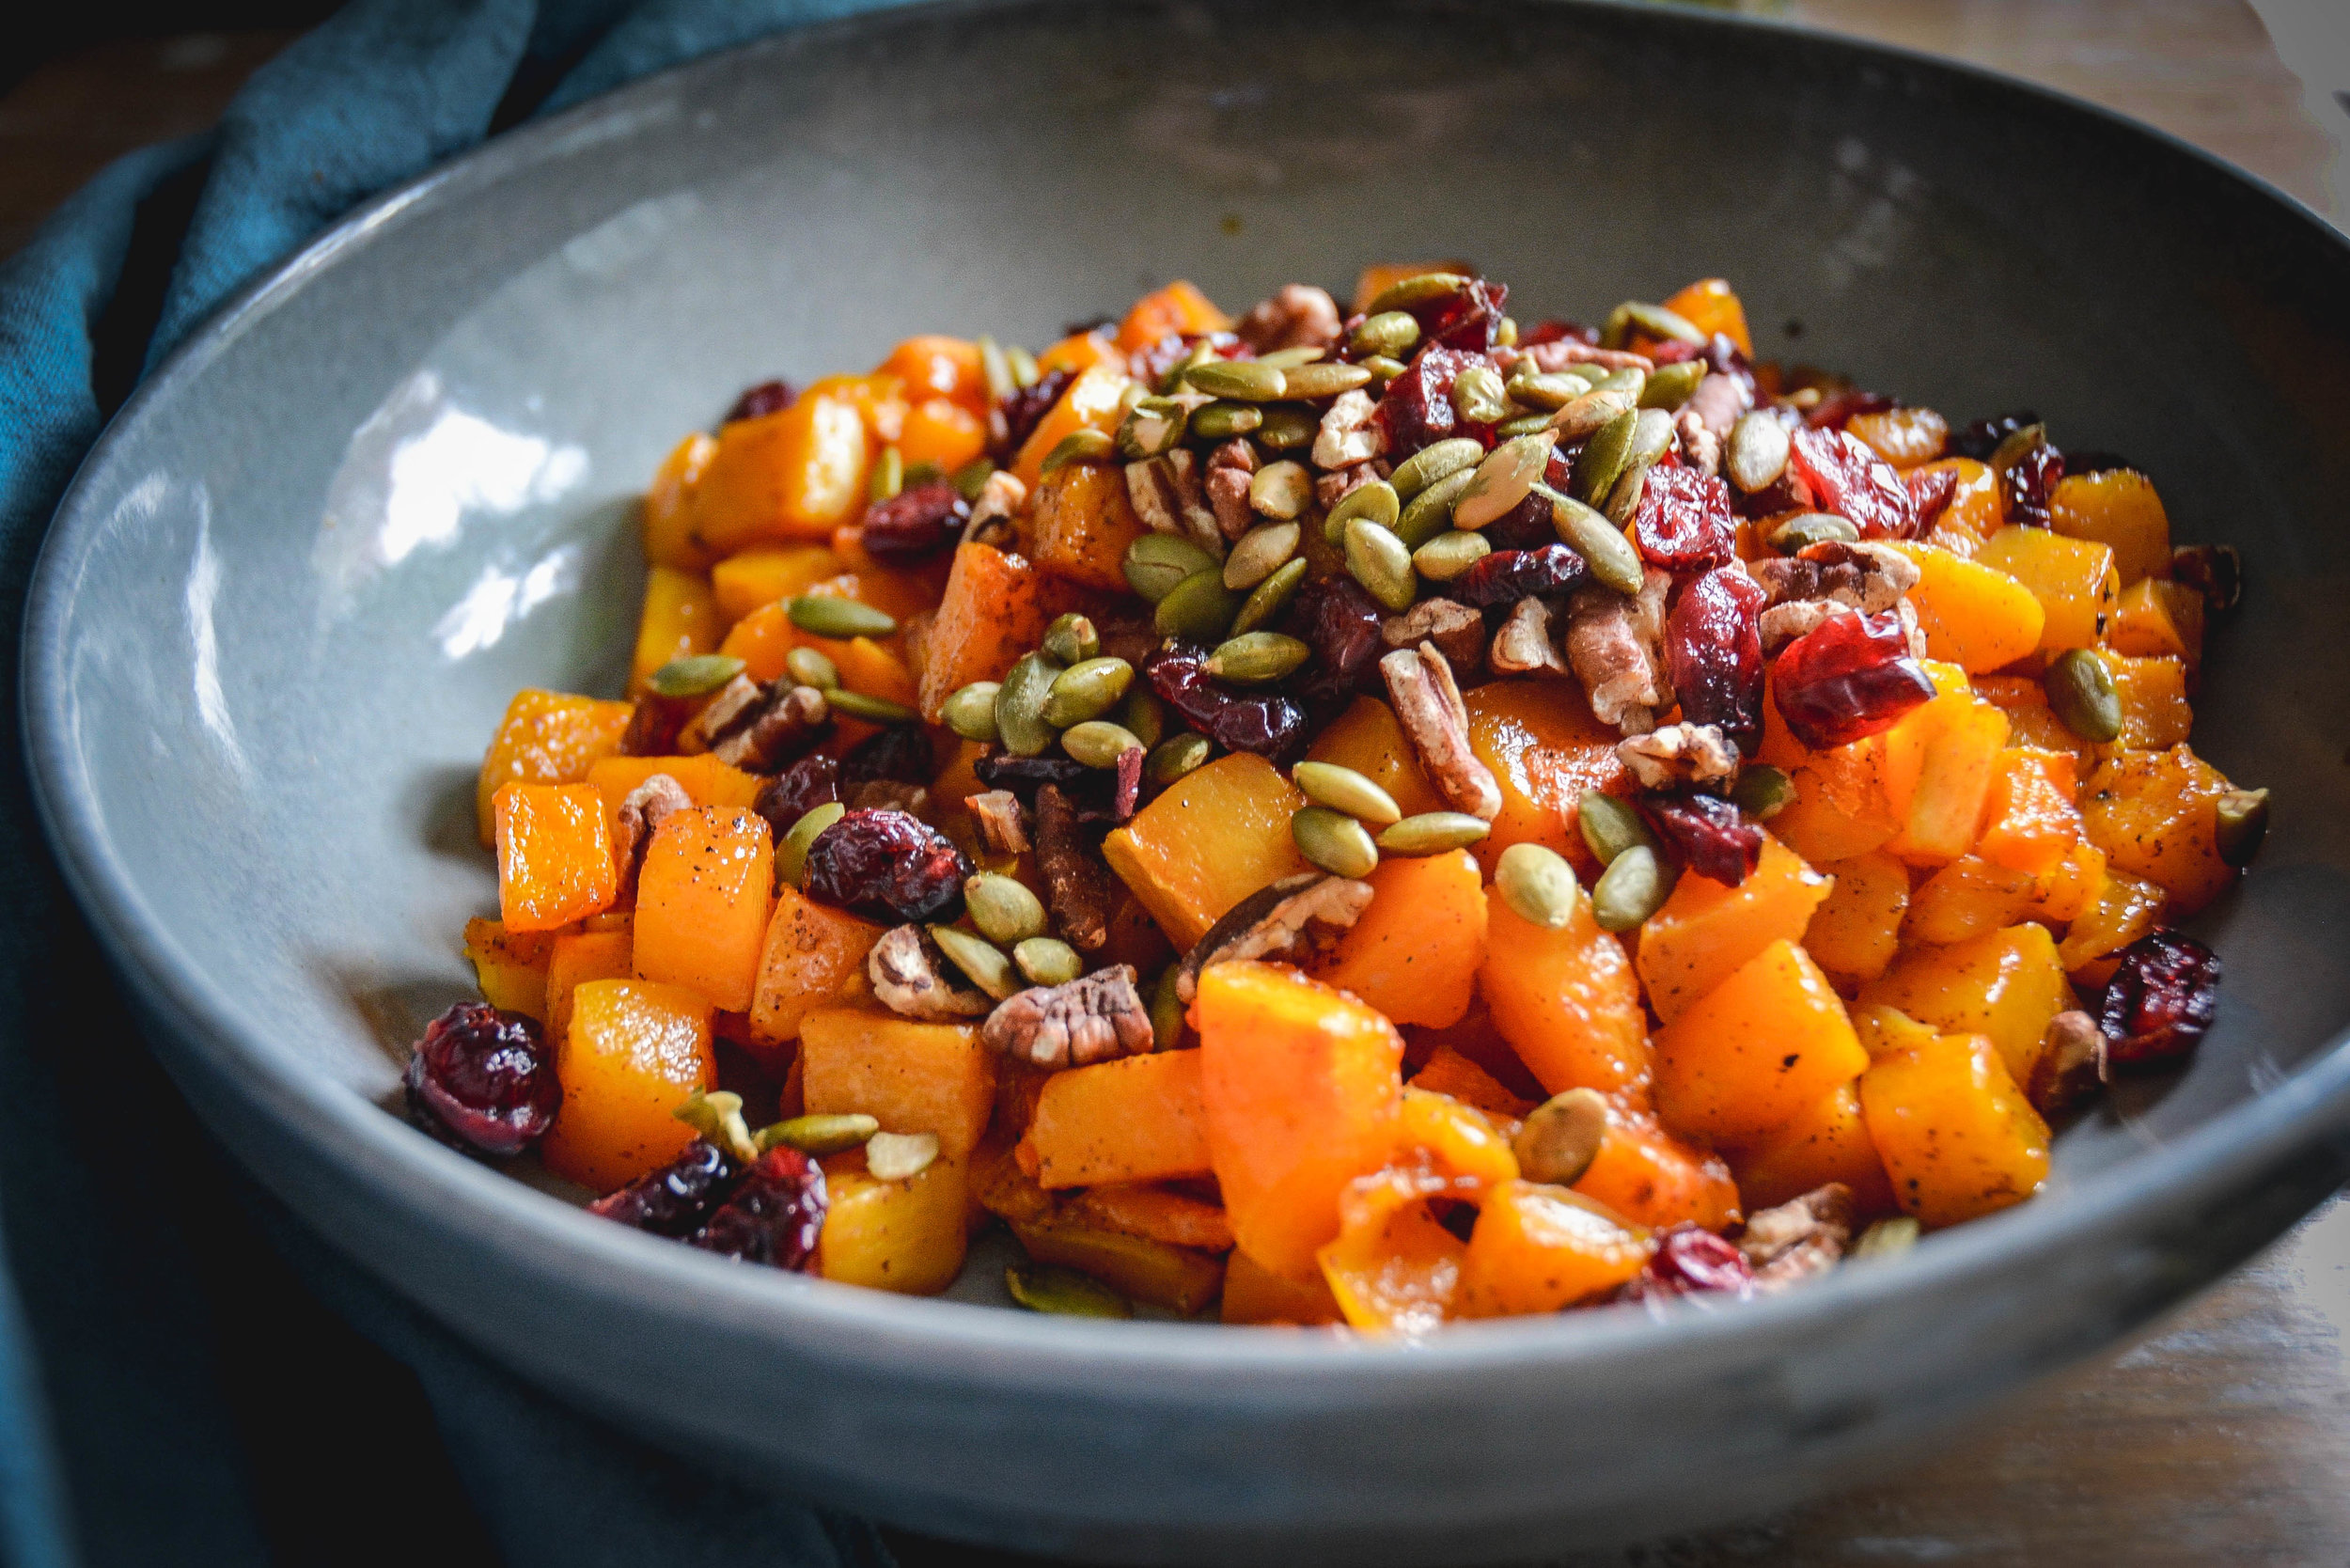 orange squash cubbed with seeds and red dried cranberries in a bowl